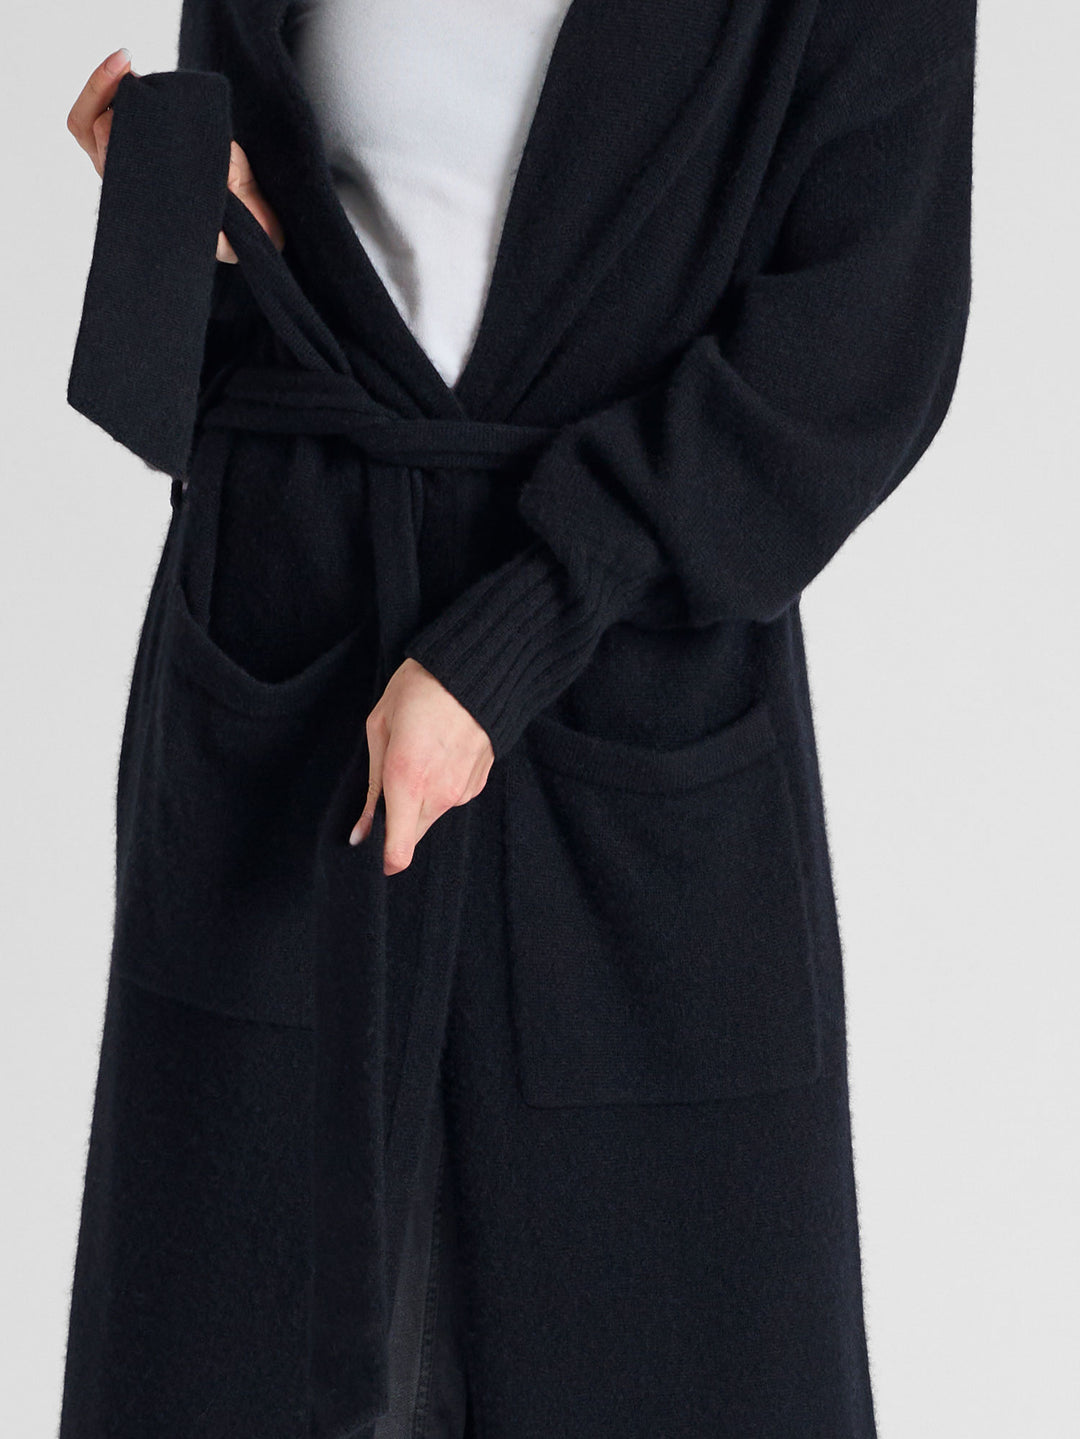 Cashmere coat "Trench" in 100% pure cashmere. Scandinavian design by Kashmina. Color: Black.